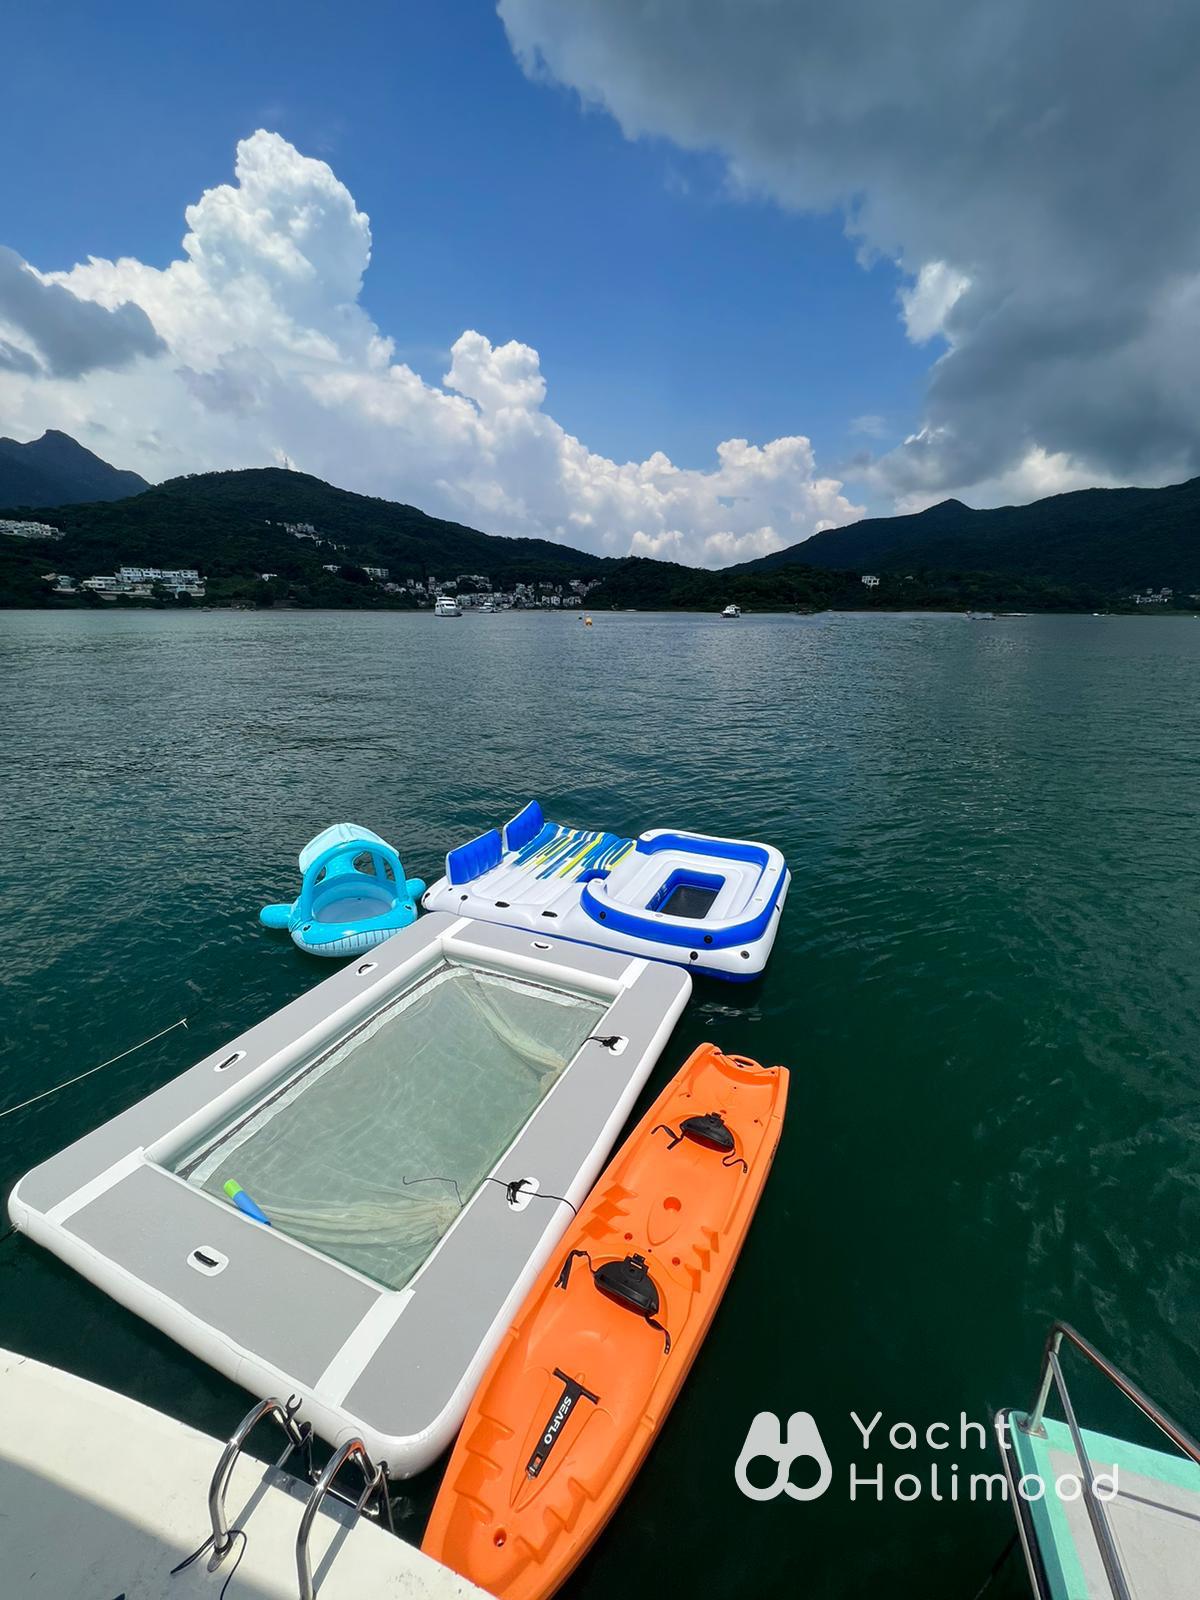 JW01 *The first choice for parents and children (equipped with life jackets and game equipment for children aged 3~12) feature Sai Kung Spacious House Boat （Swimming Pool & Wakesurfing options ava.) 18